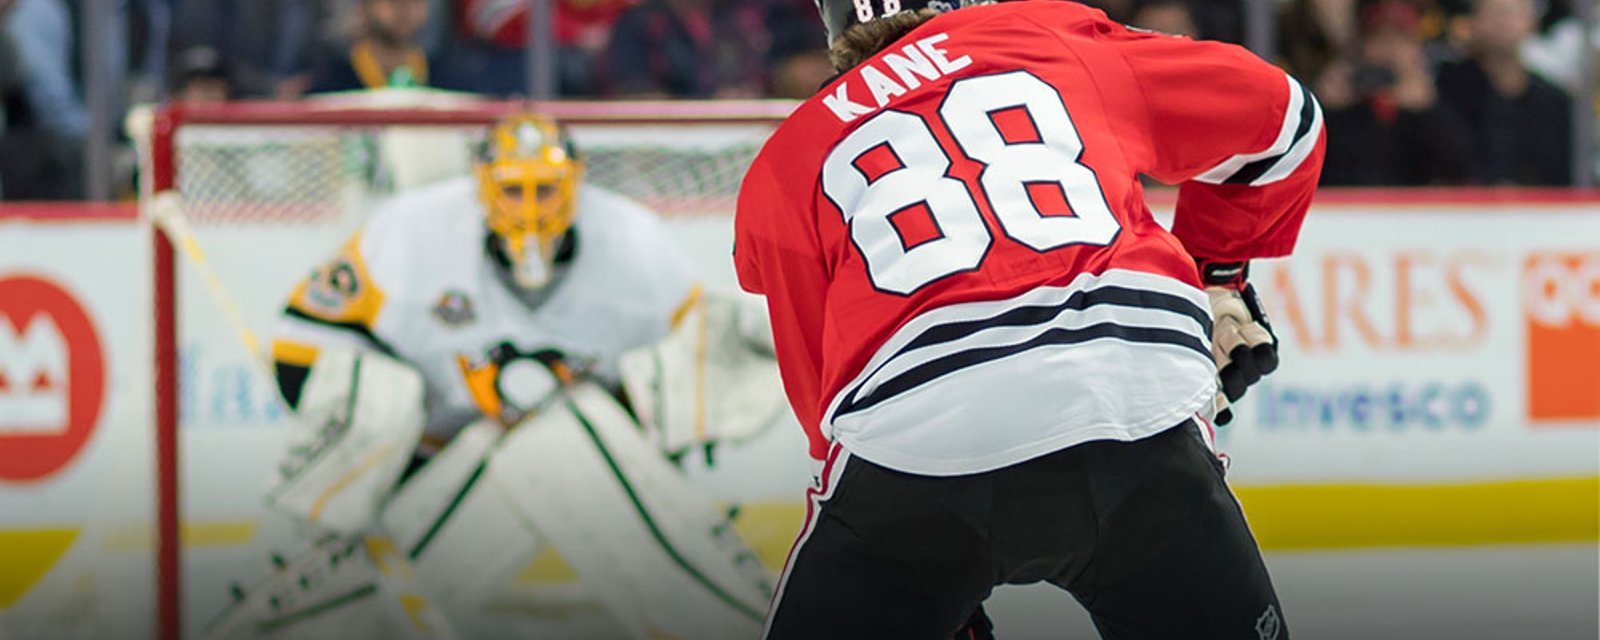 Must See: Kane delivers crazy shootout trick in Chicago charity game